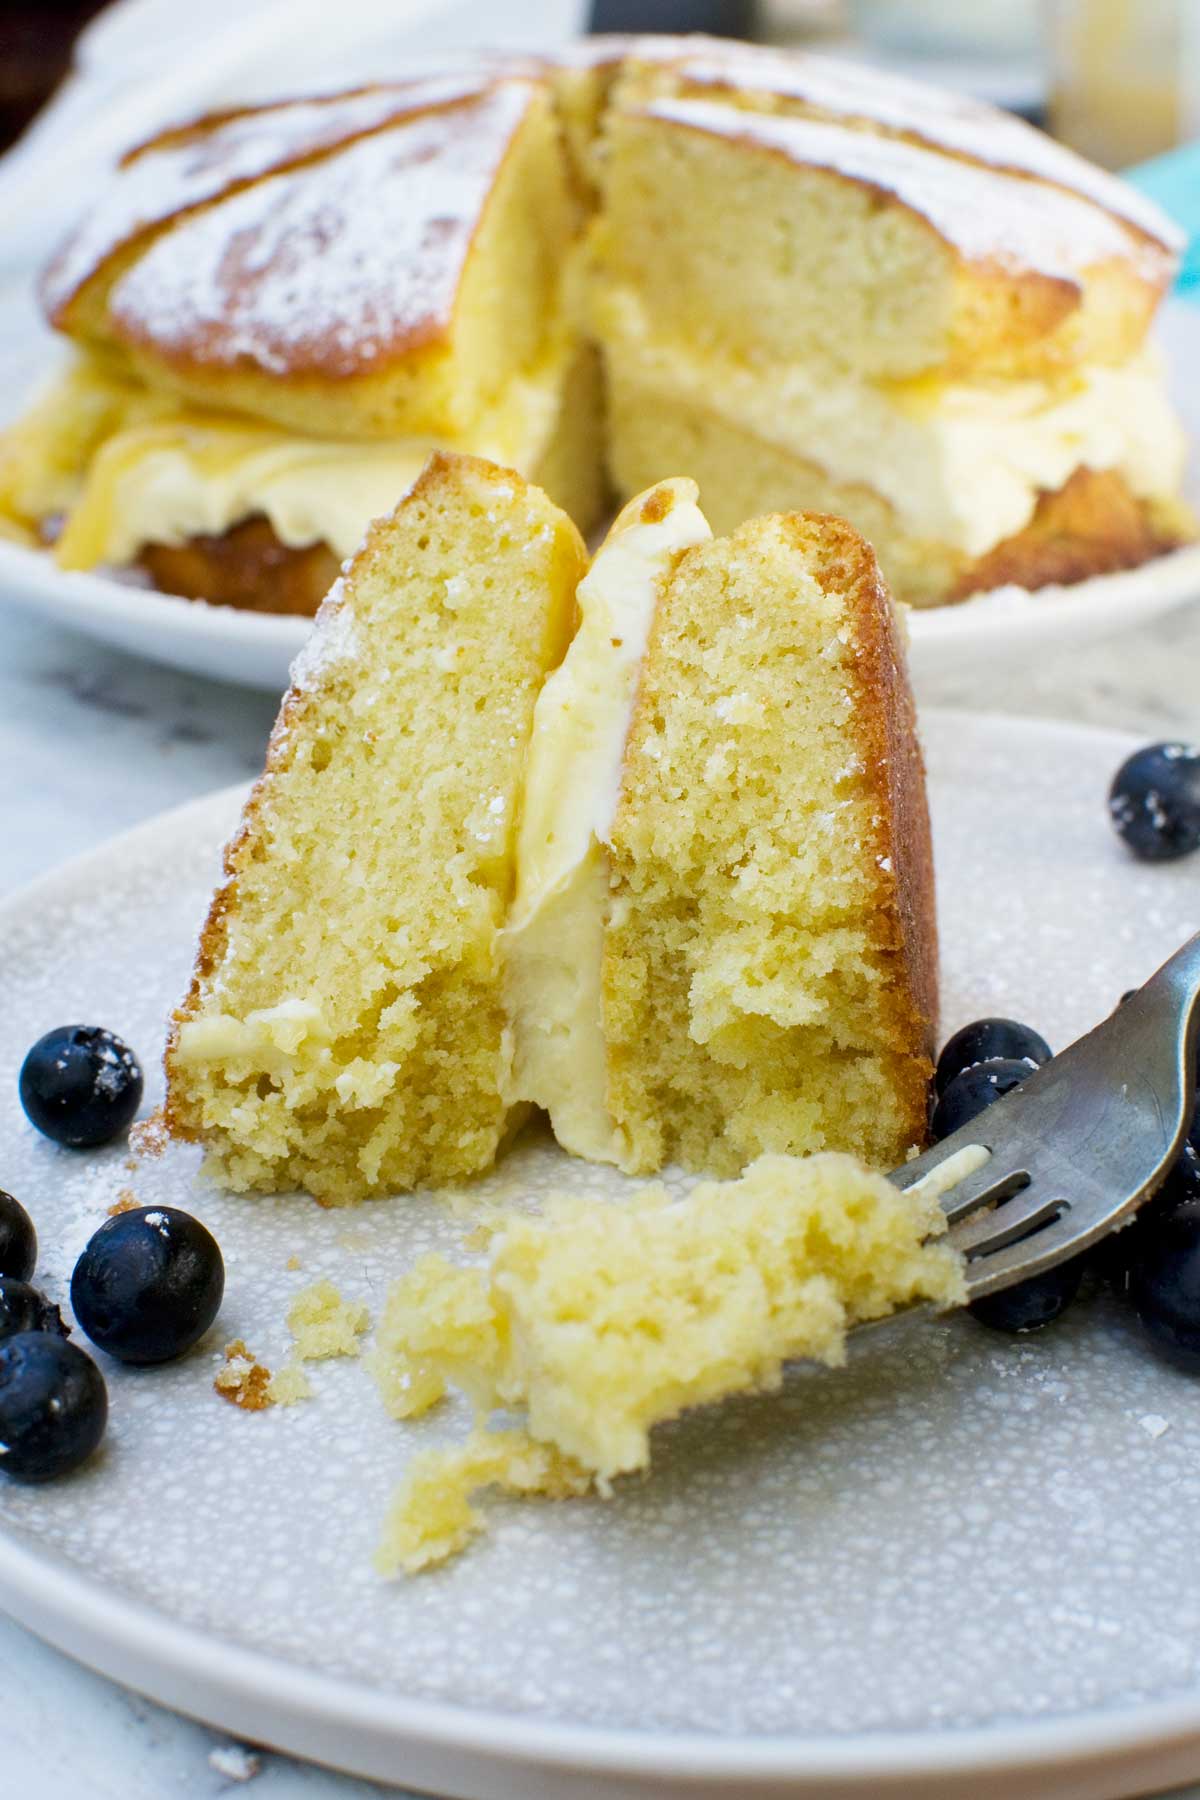 Someone eating a slice of lemon mascarpone cake on a pale beige plate with blueberries with a fork